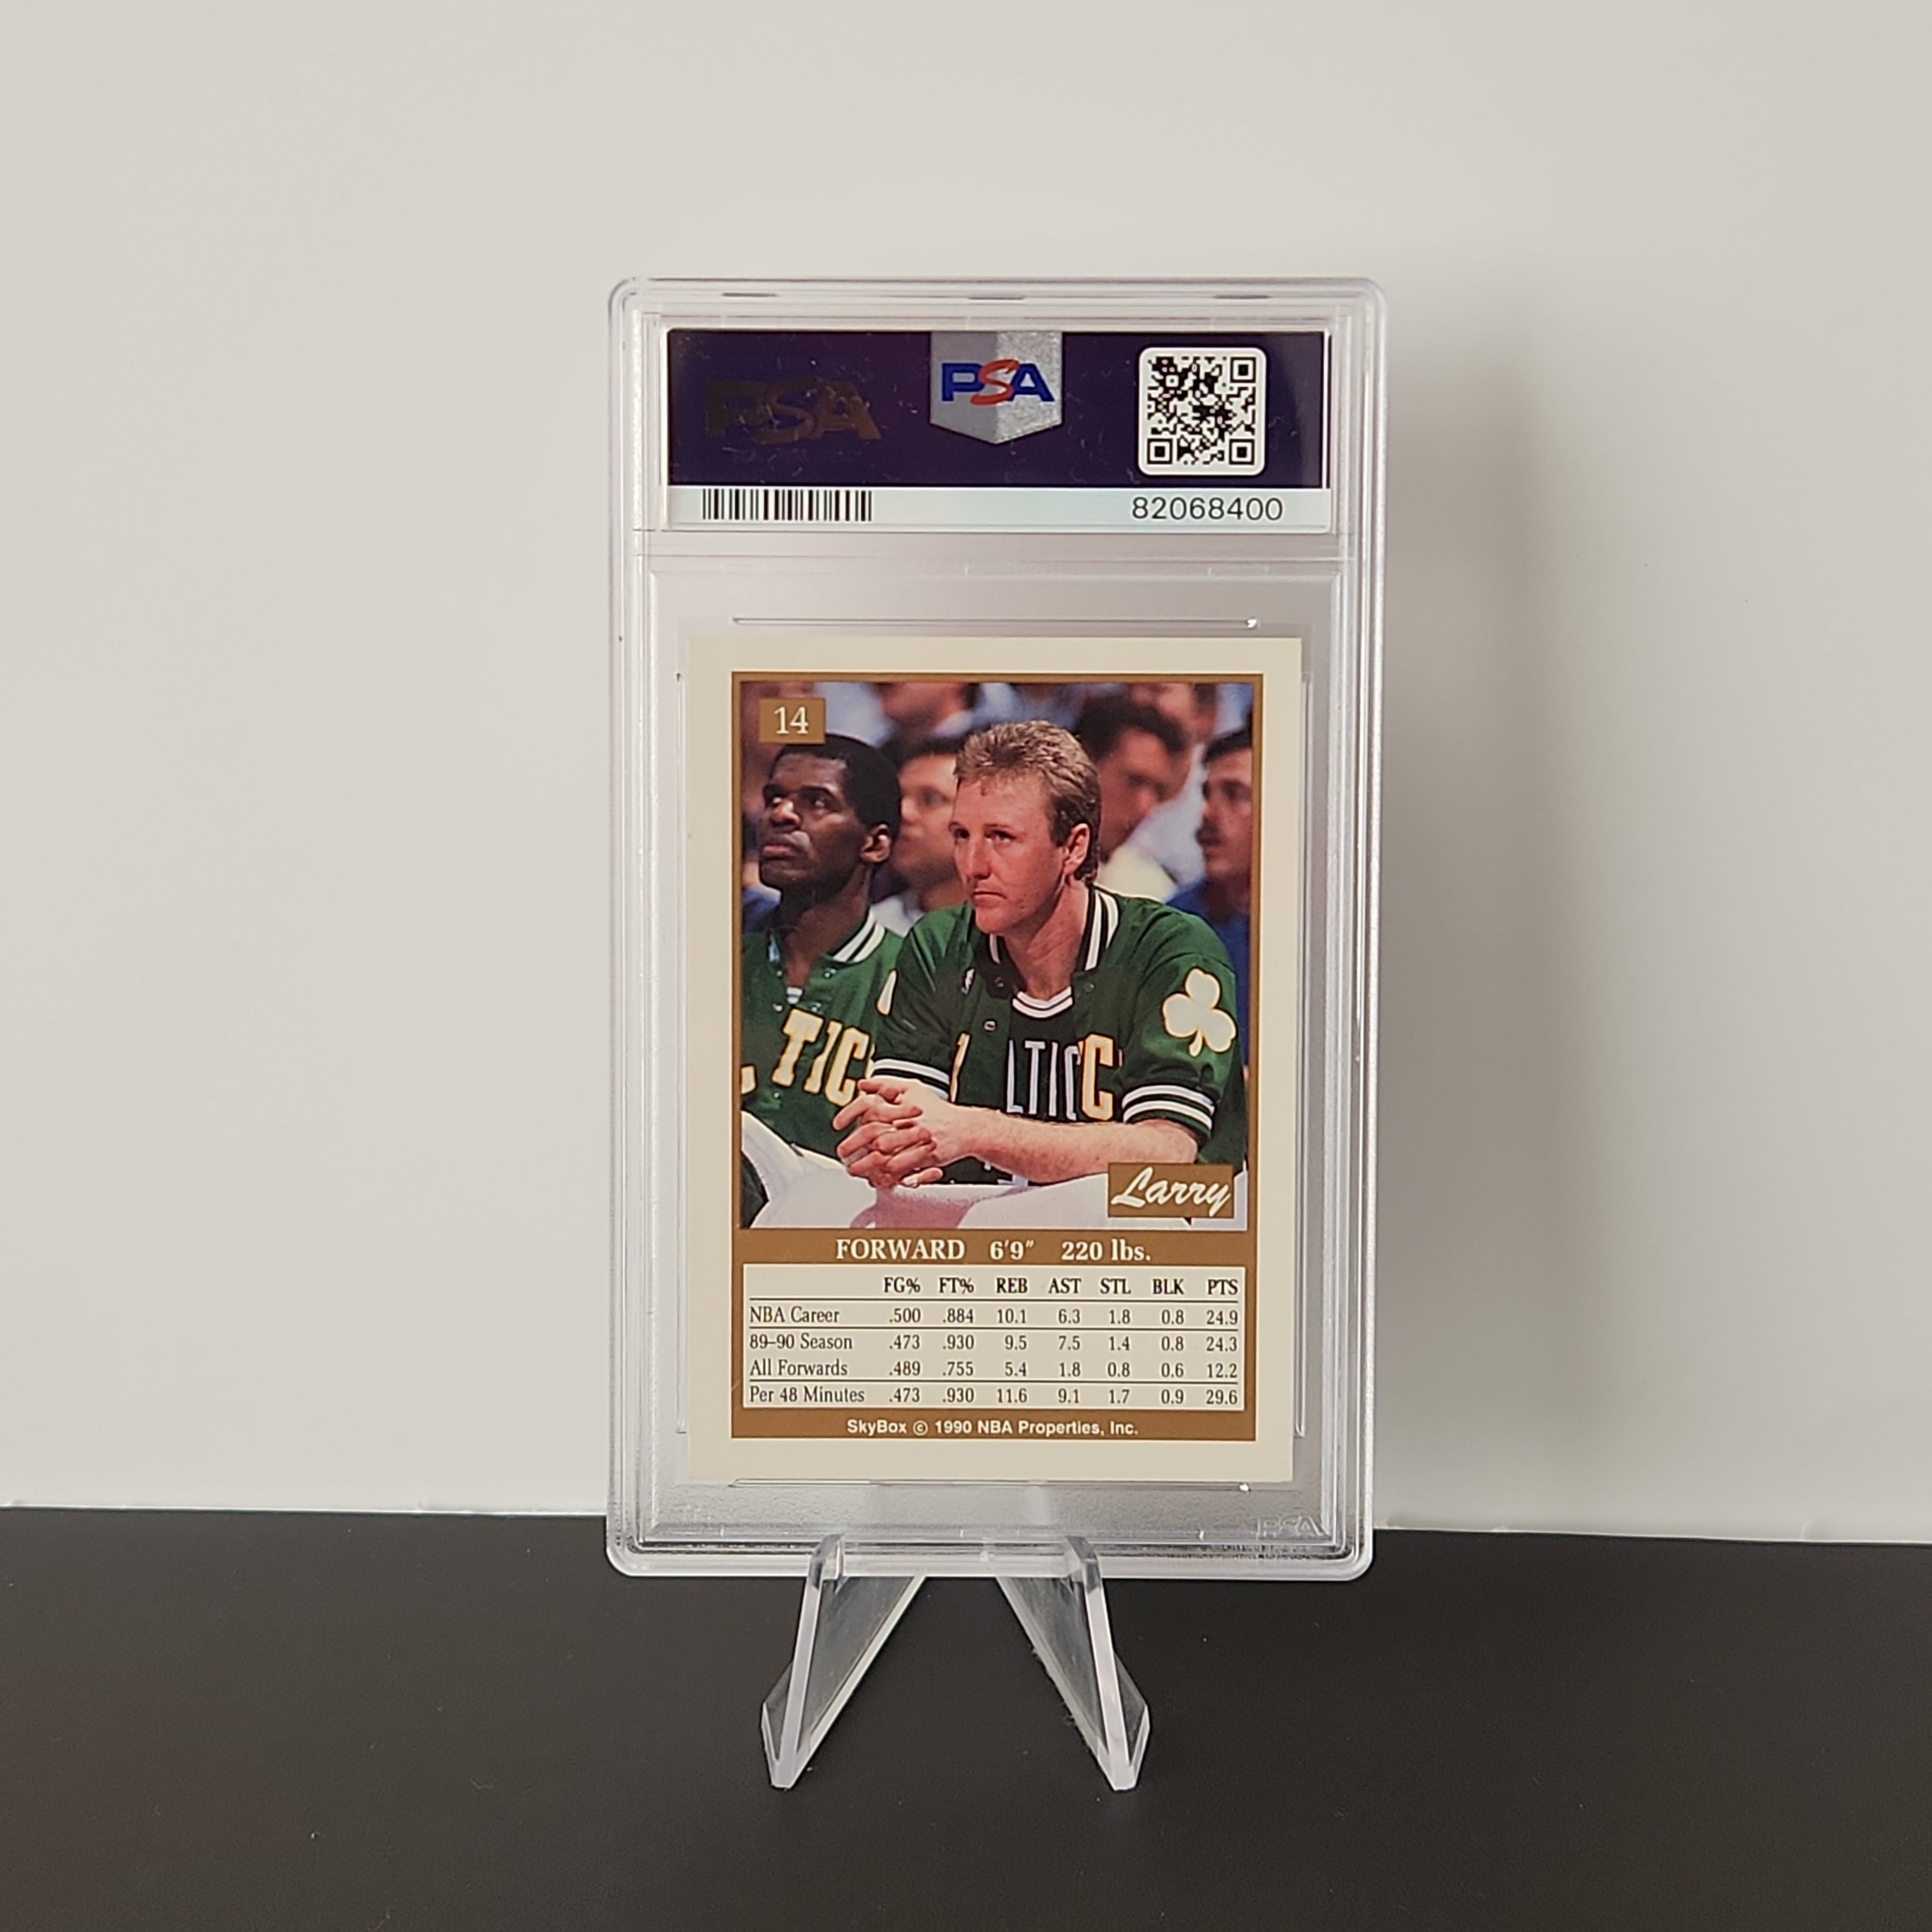 Larry Bird 1990/91 Skybox #14 **PSA EX-MT 6** - Premium  from 1of1 Collectables - Just $75! Shop now at 1of1 Collectables